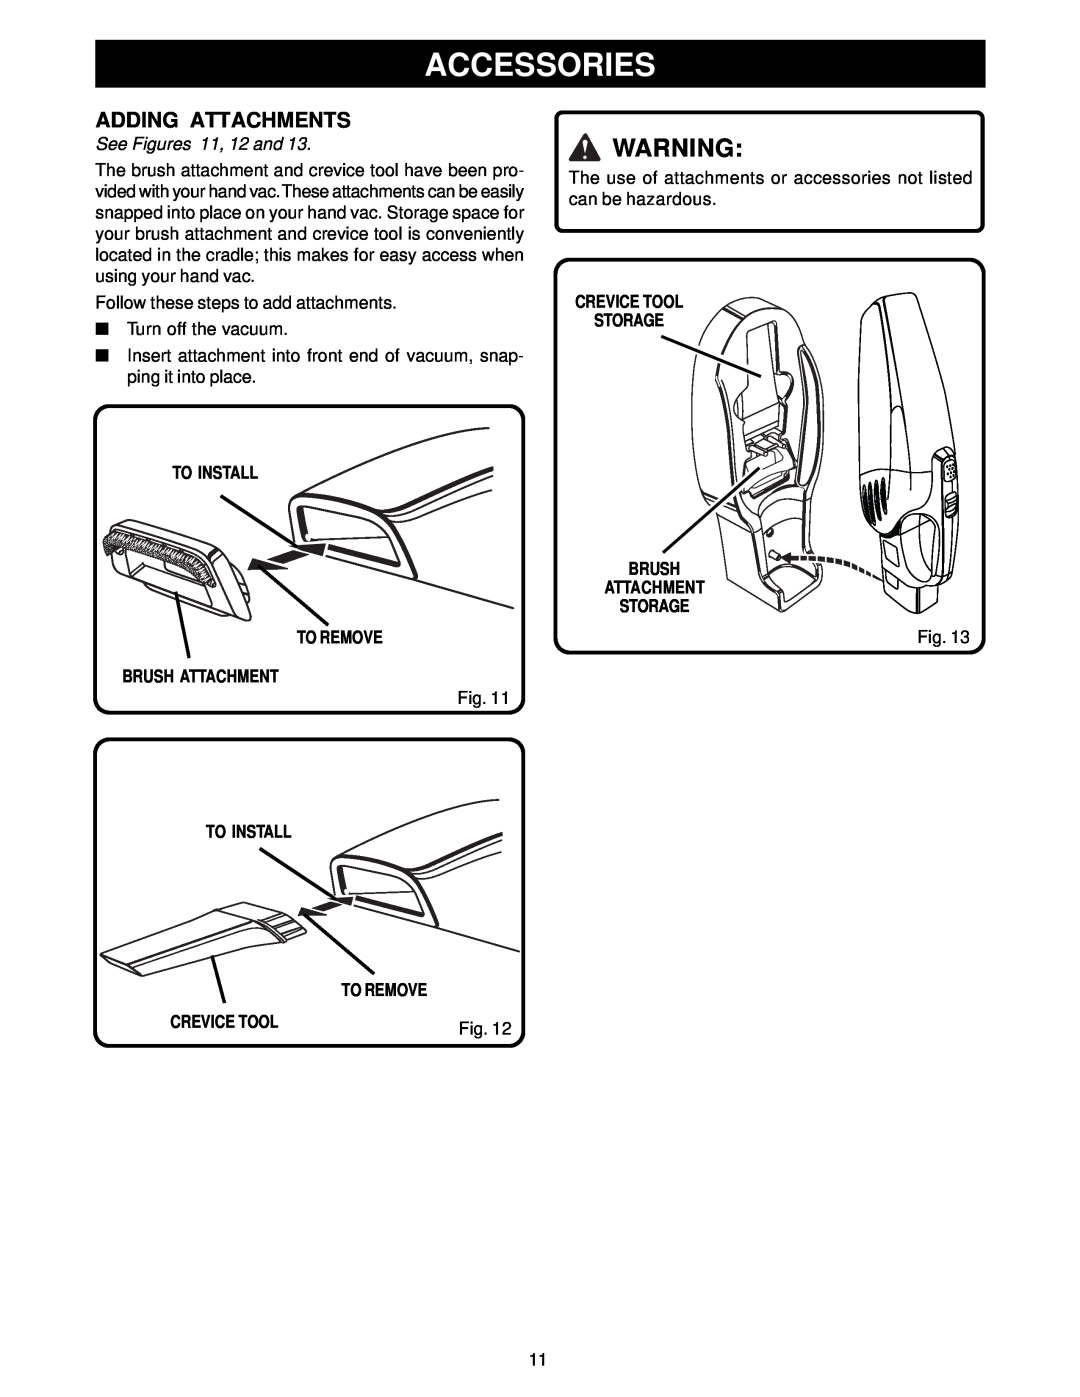 Ryobi VC722 Accessories, Adding Attachments, See Figures 11, 12 and, To Install To Remove Brush Attachment, Crevice Tool 